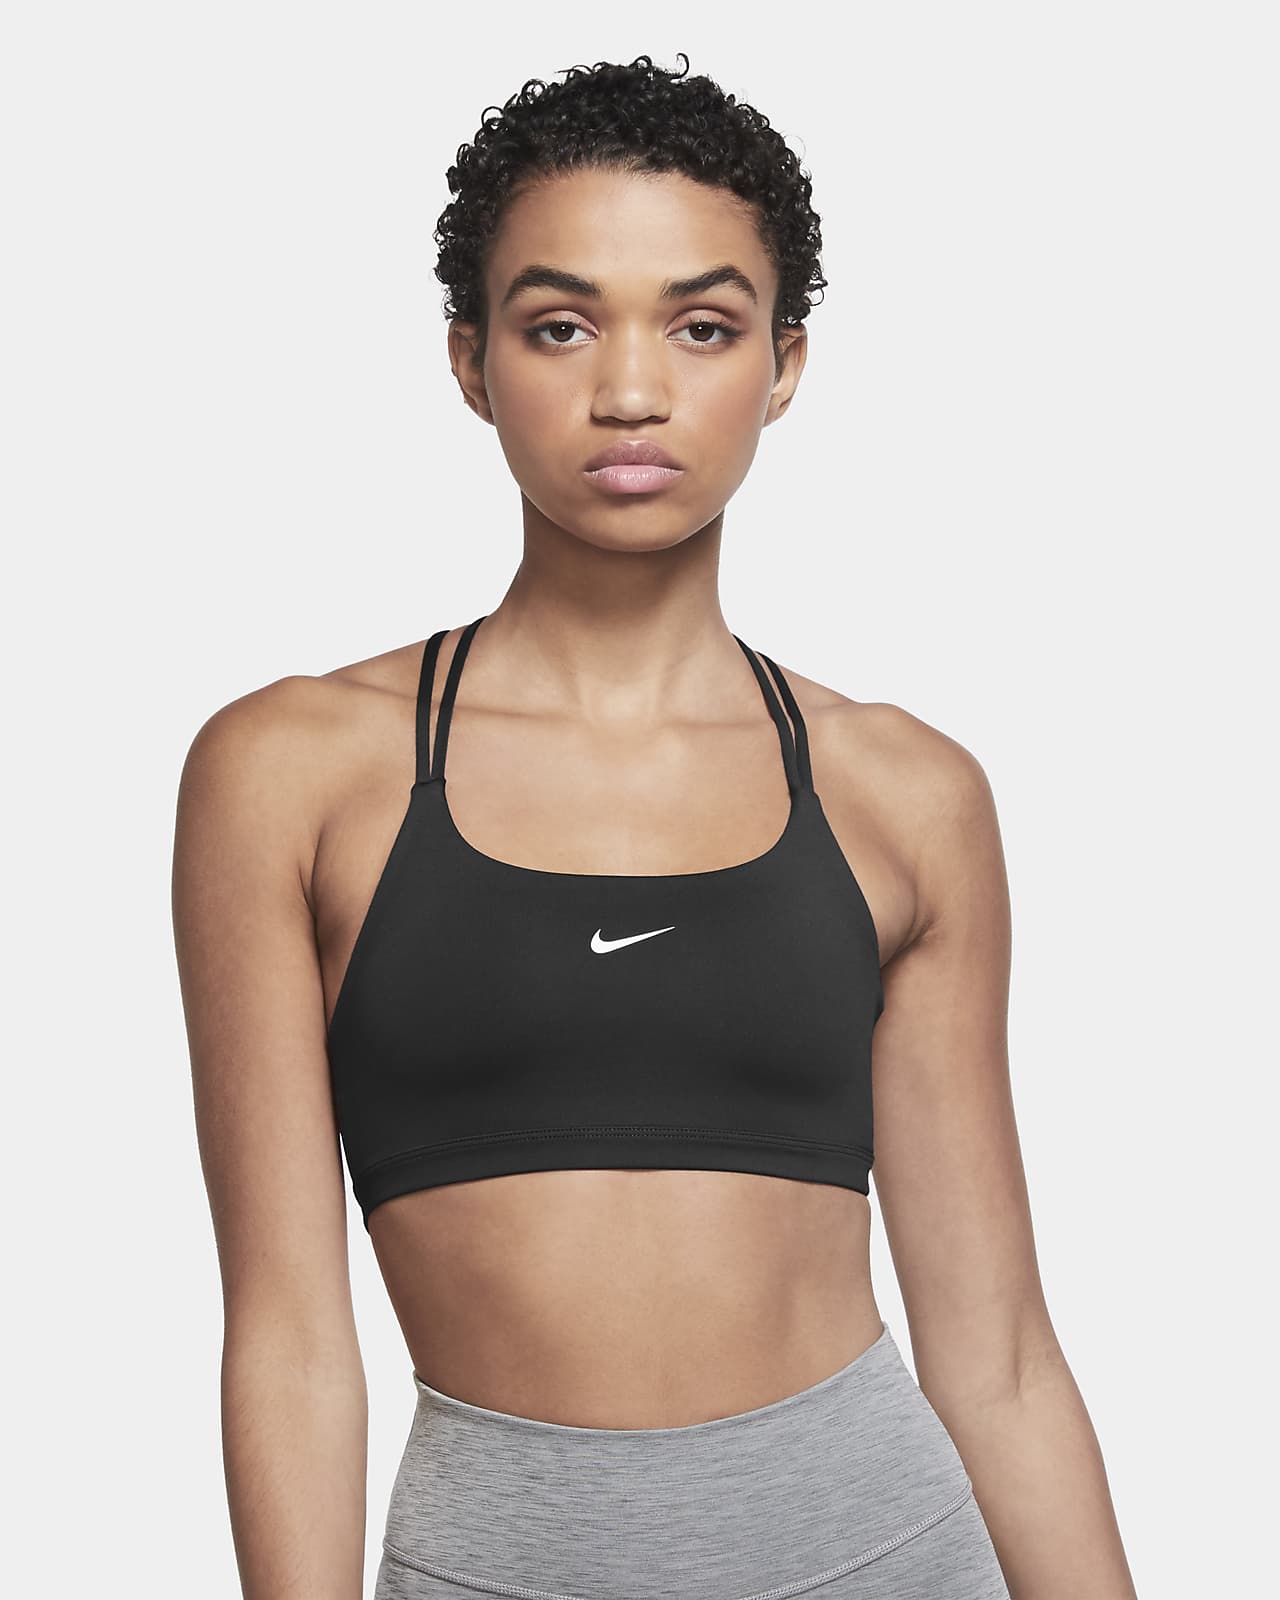 Nike Dri-FIT Indy Women's Light-Support, Non-Padded Sports Bra